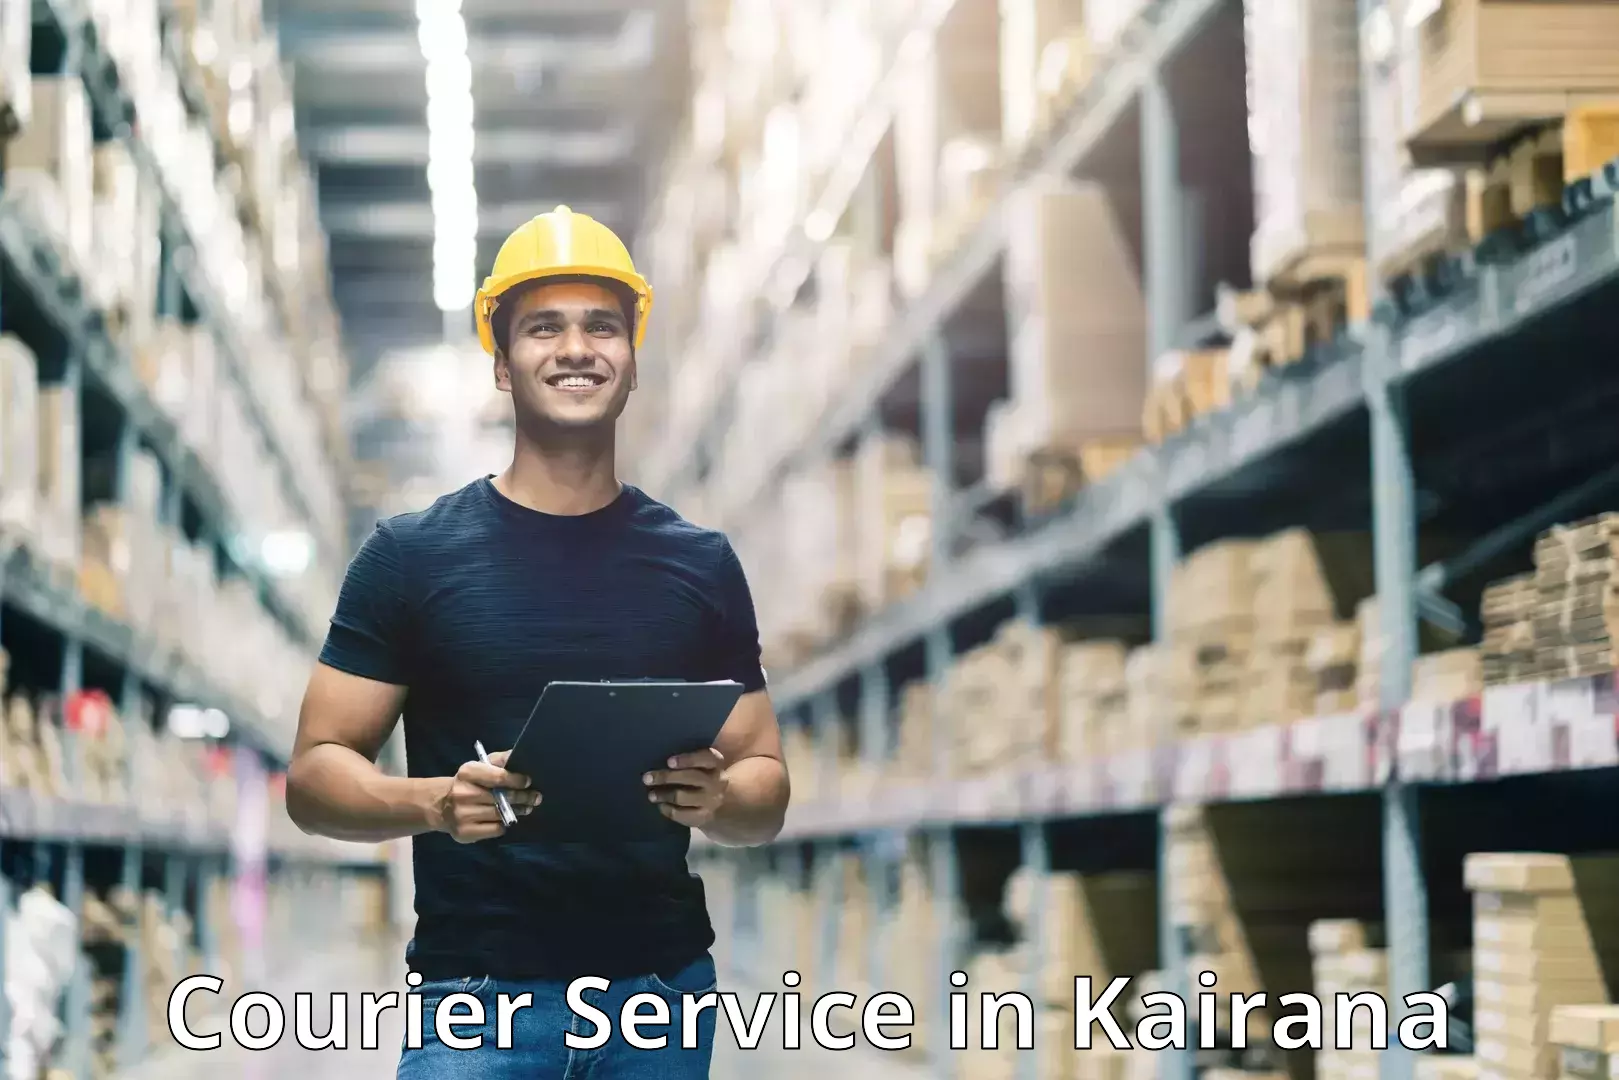 Customer-friendly courier services in Kairana